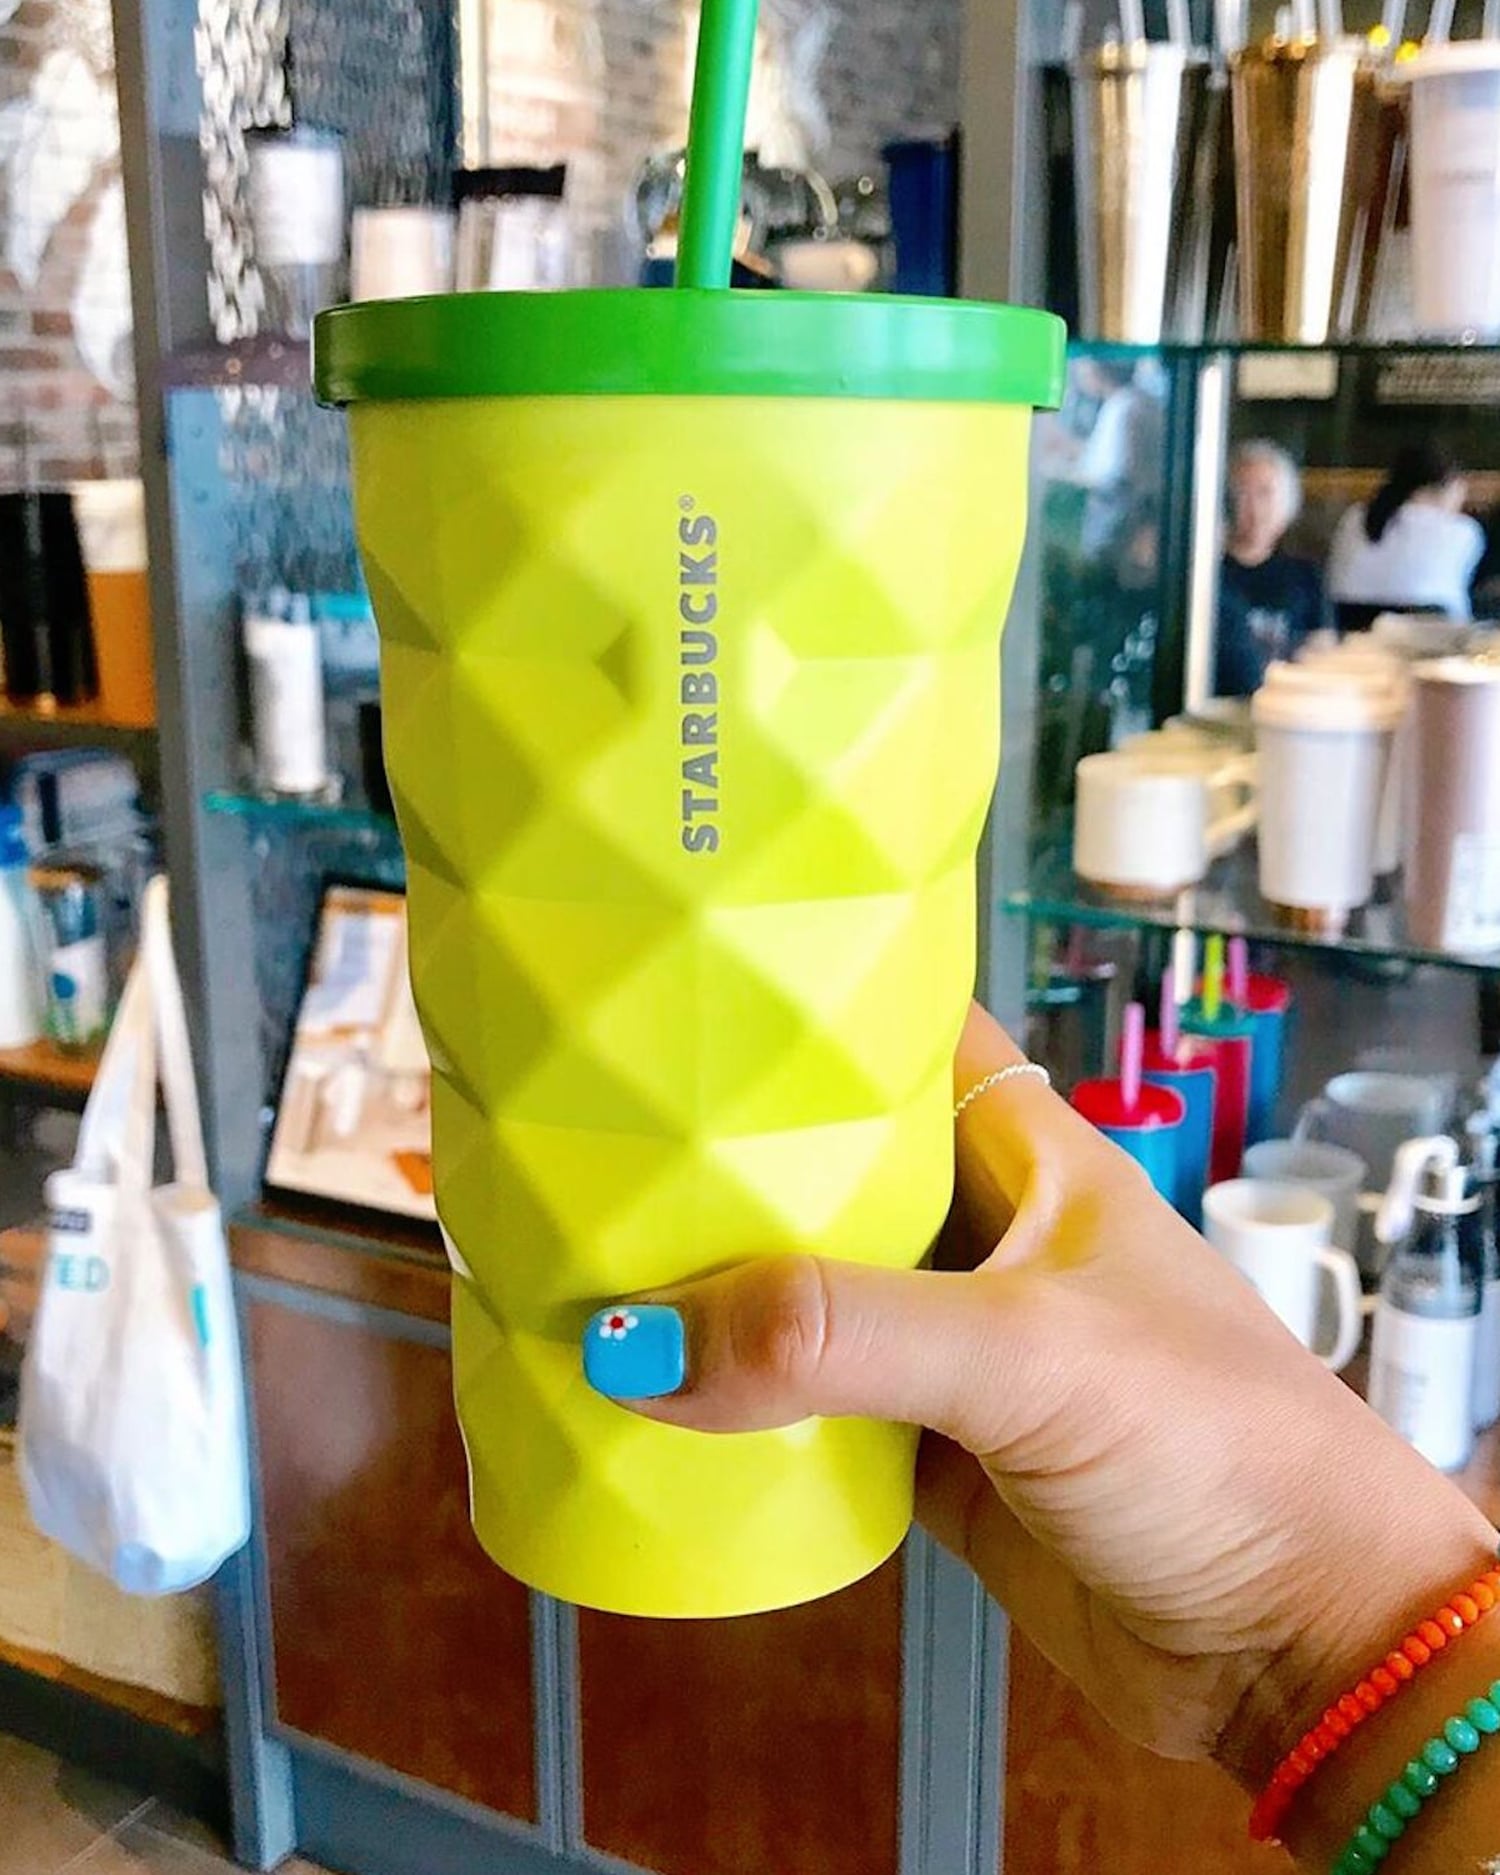 Starbucks Stores in Hawaii Are Selling Cute Pineapple Cups